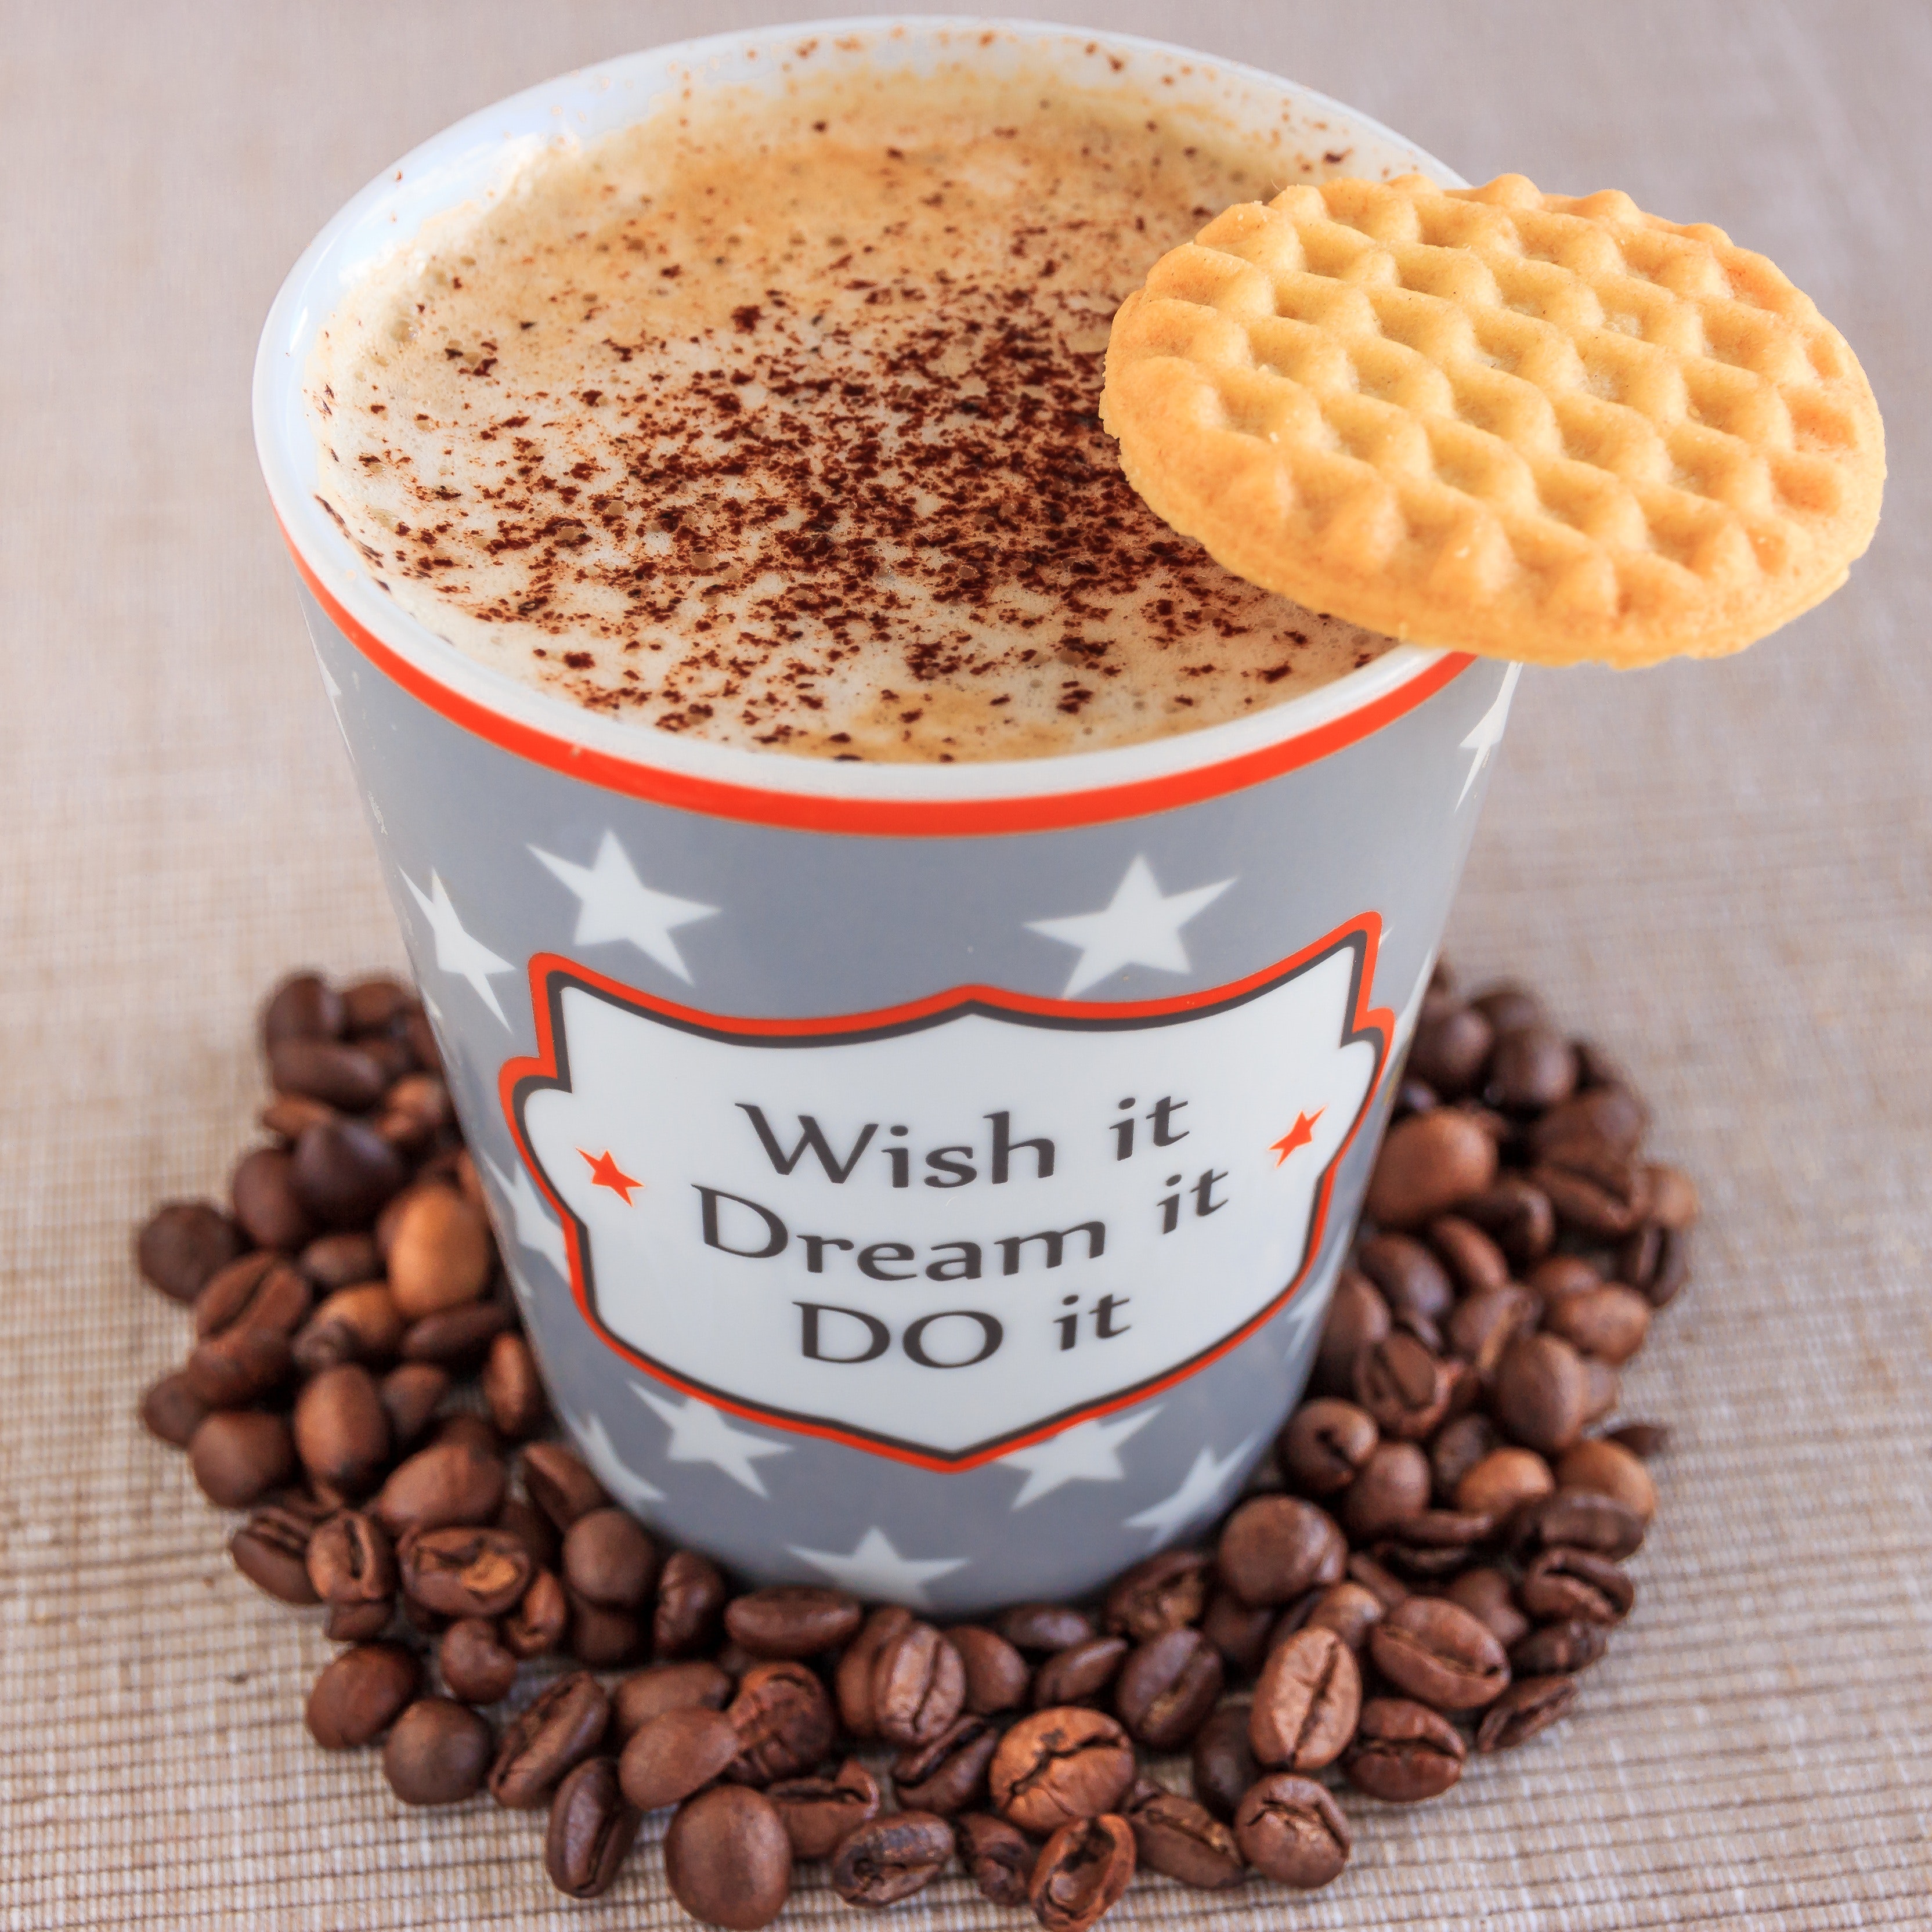 Wish It Dream It Do It Print Cup, Beans, Cup, Relaxation, Porcelain, HQ Photo